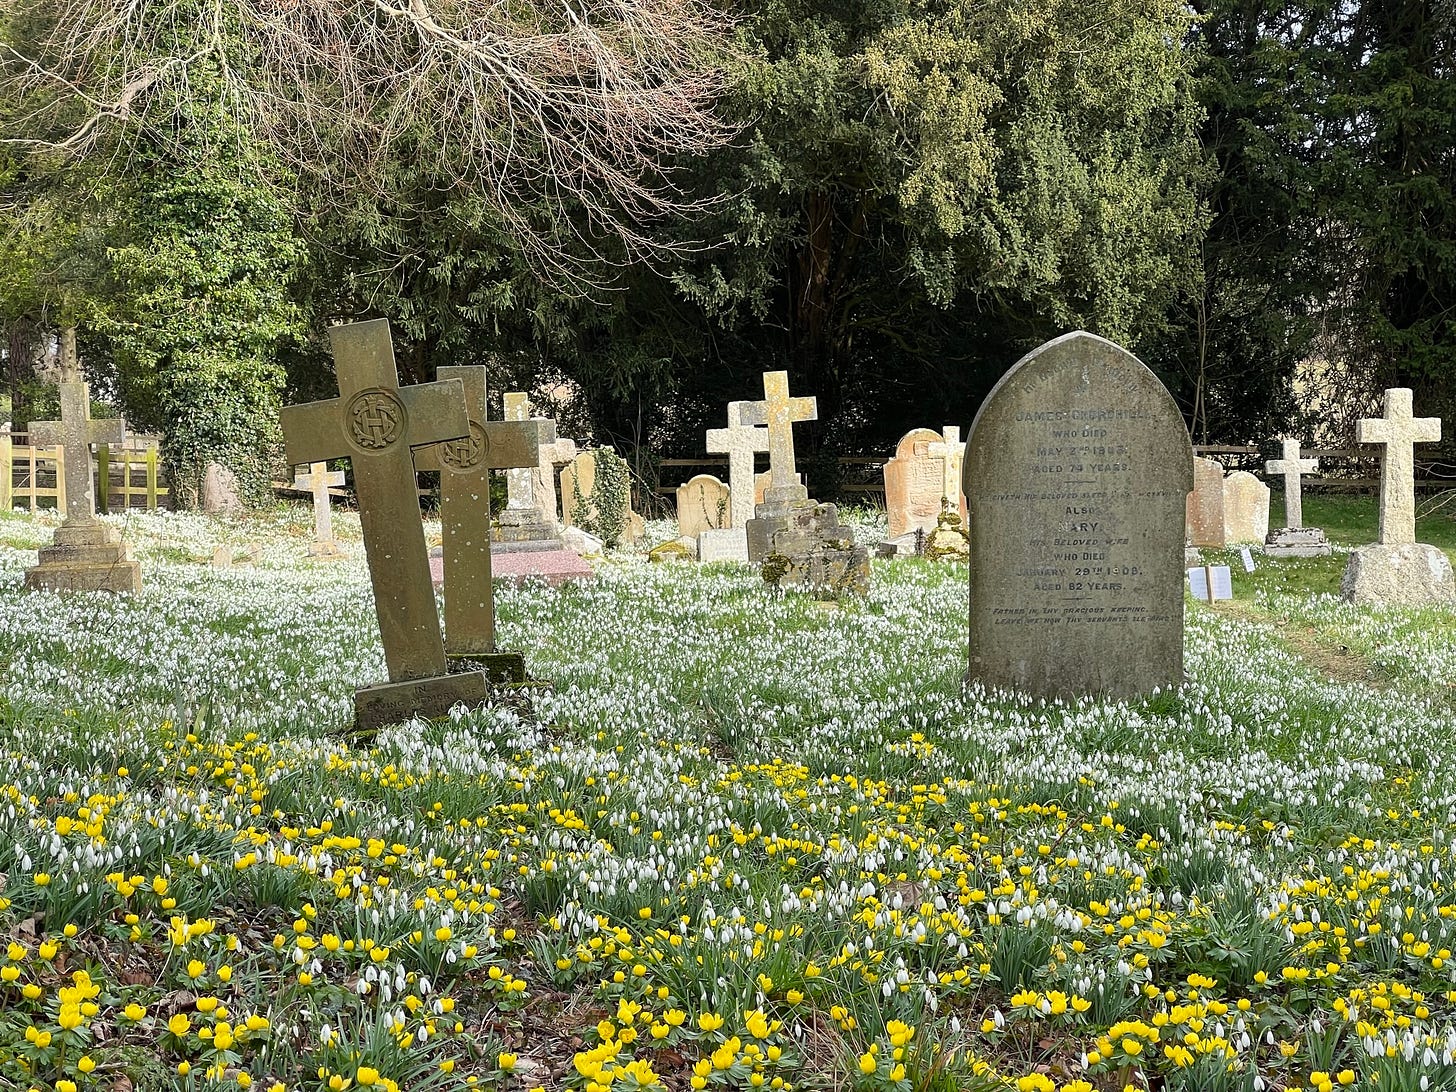 Photo by Author — Snowdrops (Galanthus nivalis) in a local graveyard (see issue -48: Suffering from the winter doldrums)